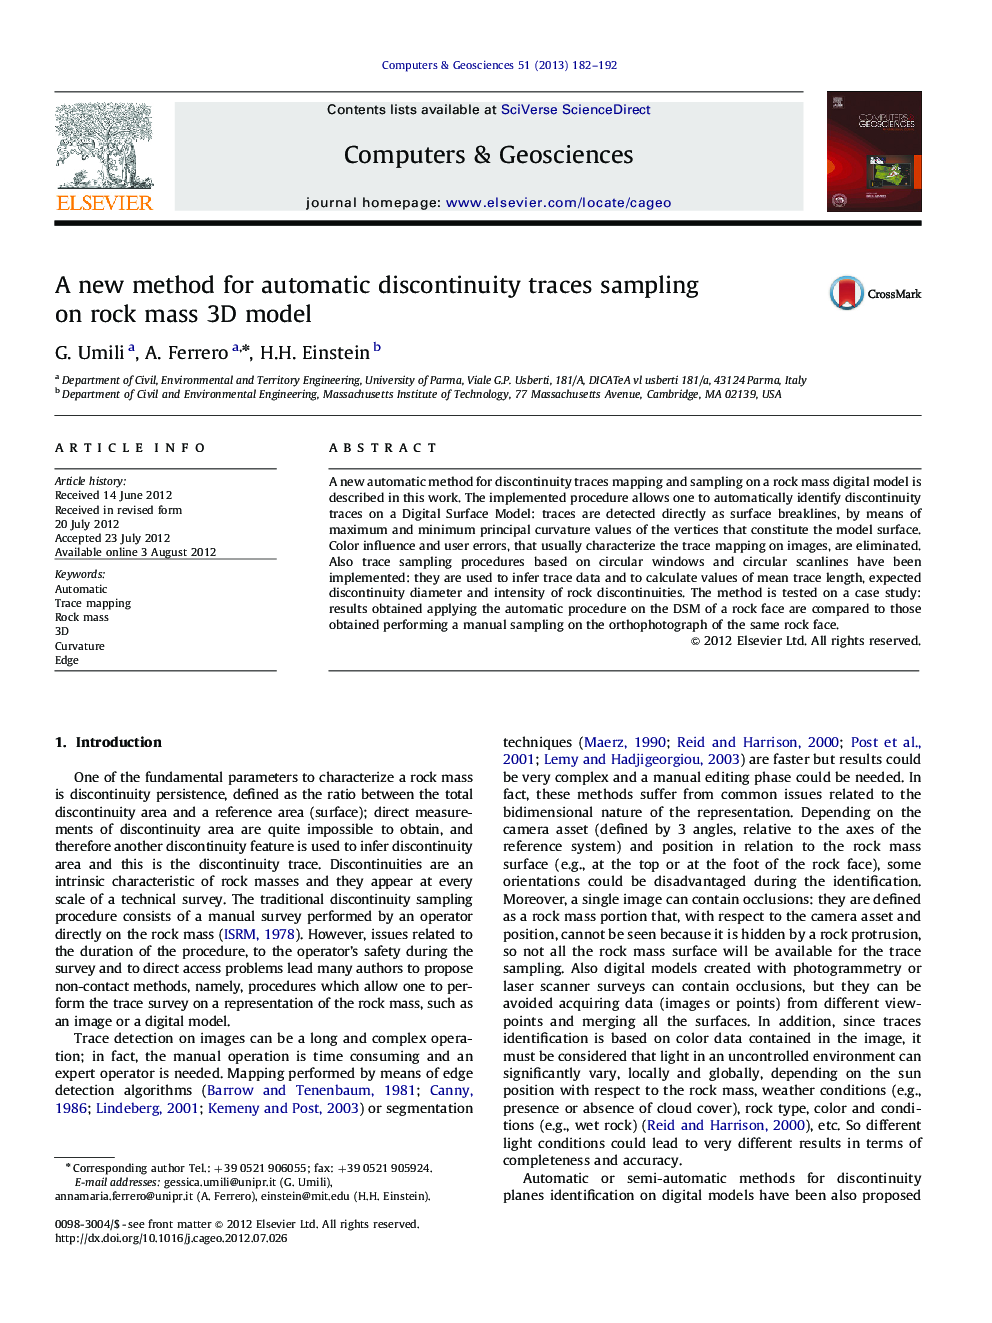 A new method for automatic discontinuity traces sampling on rock mass 3D model